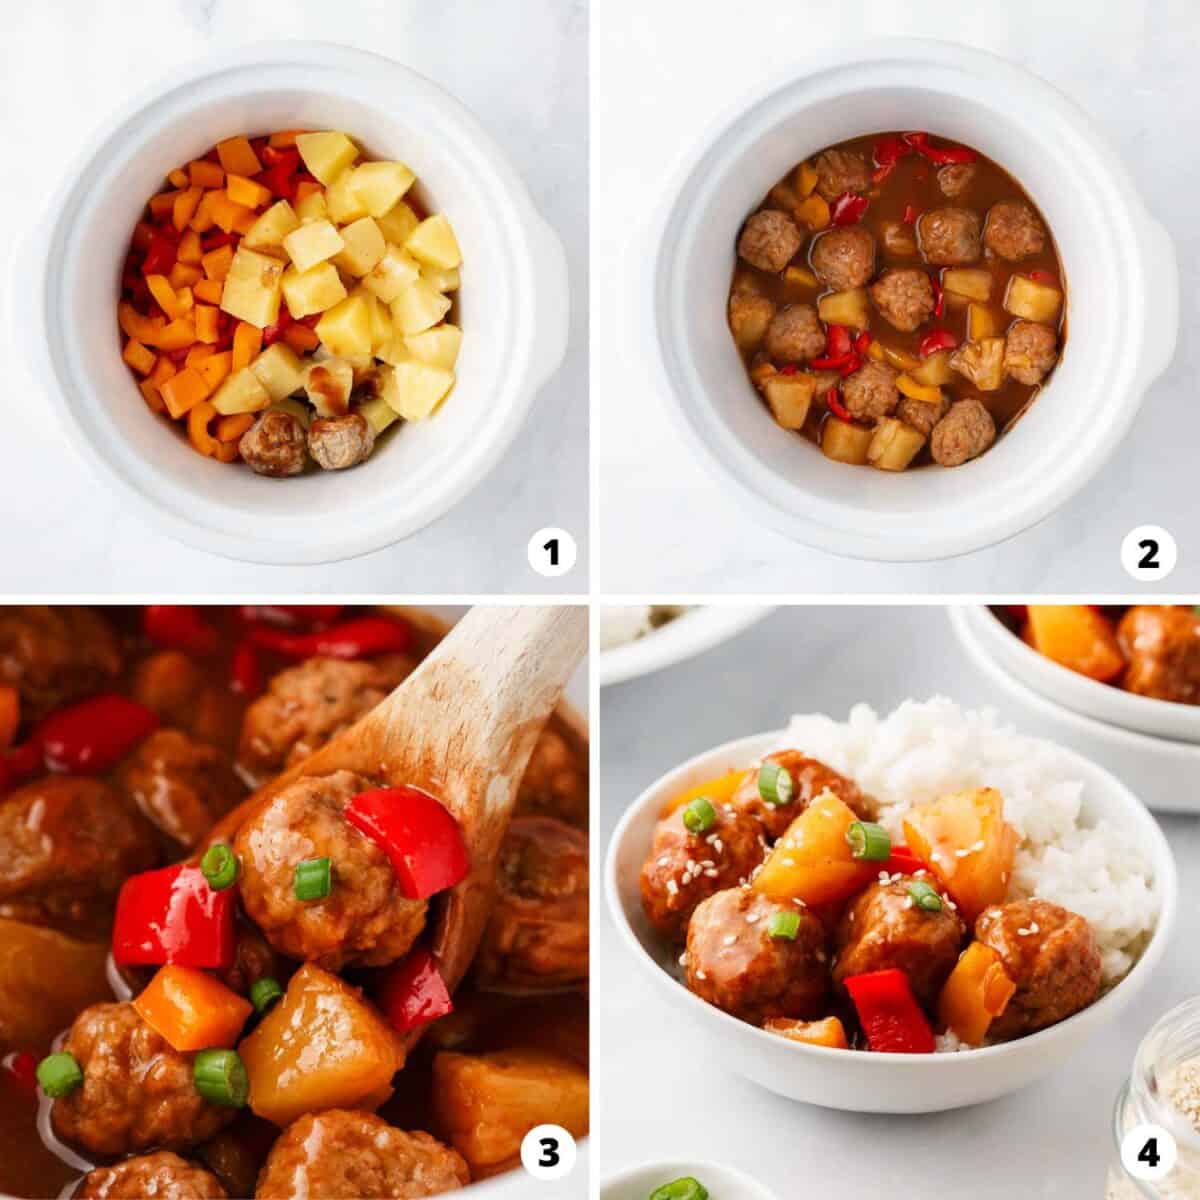 Showing how to make hawaiian meatballs in a 4 step collage.